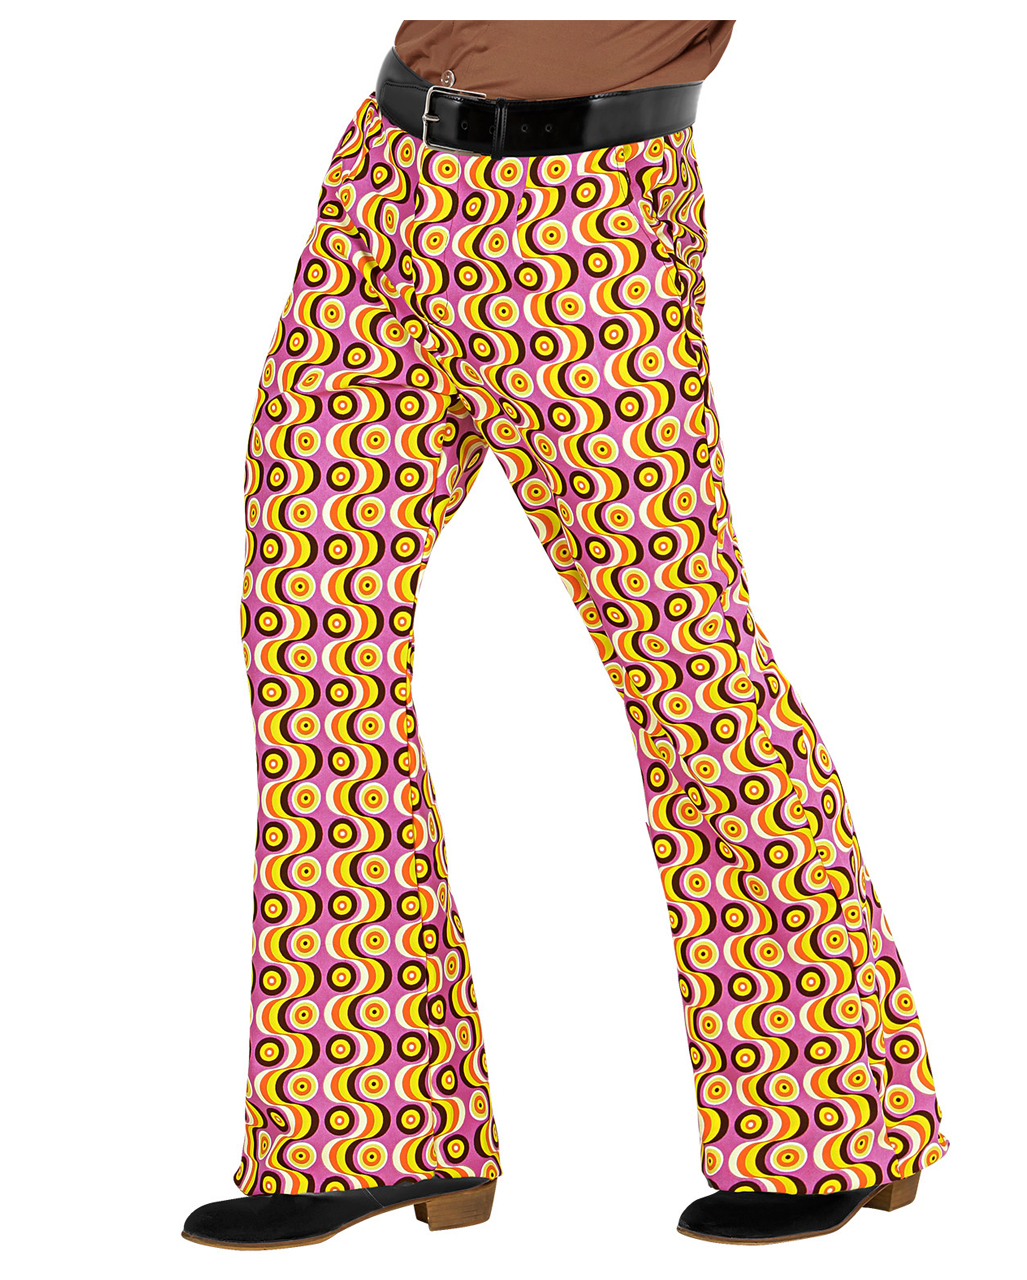 groovy trousers